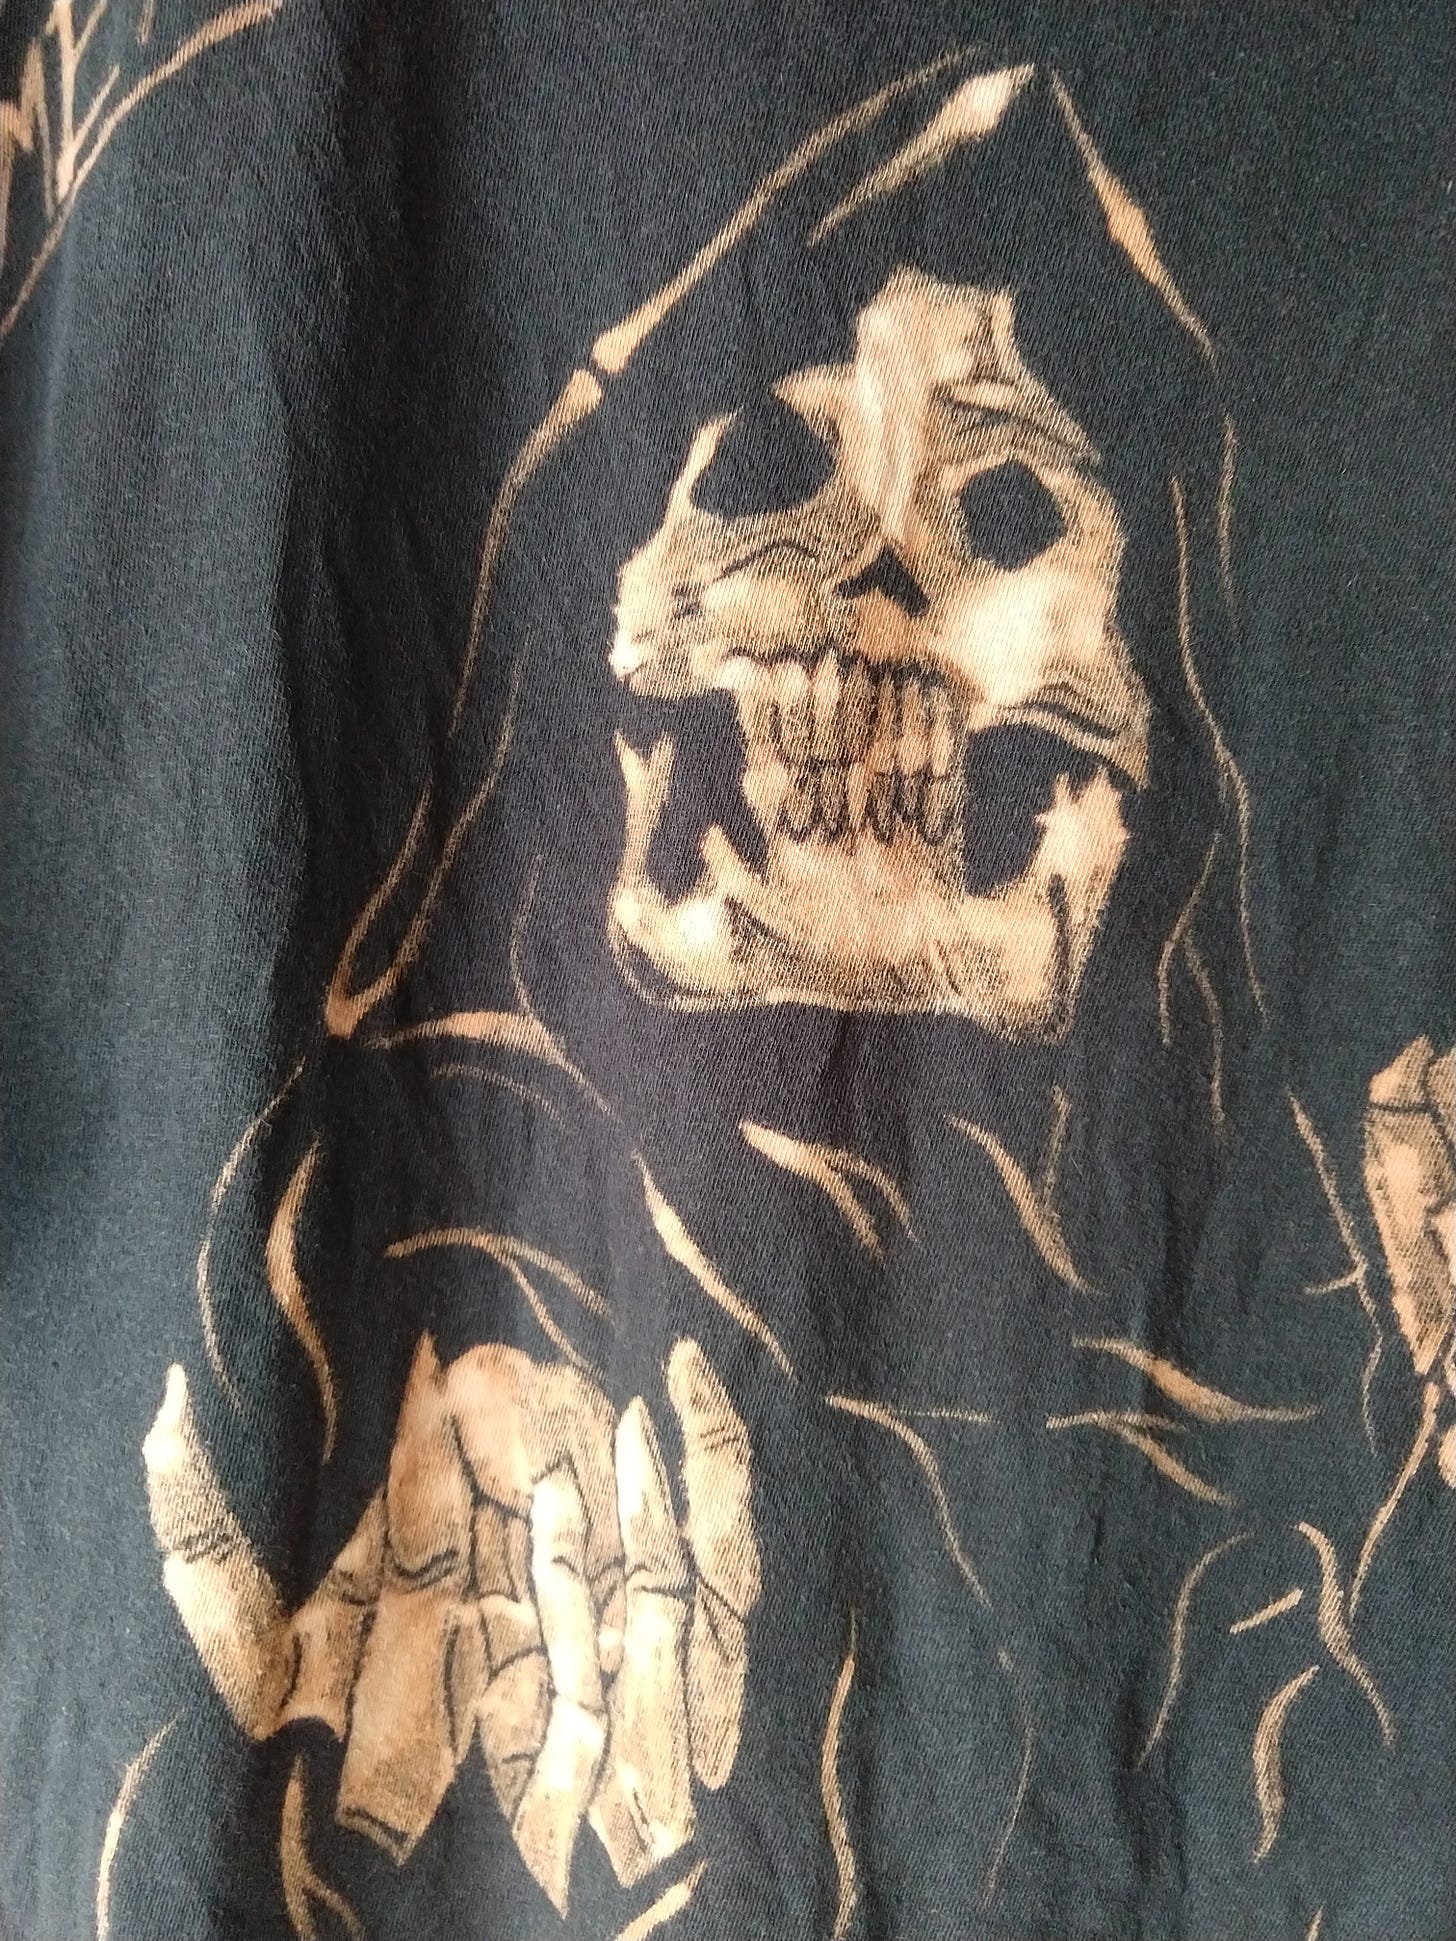 t-shirt detail: Death's hand reaching out, beckoning